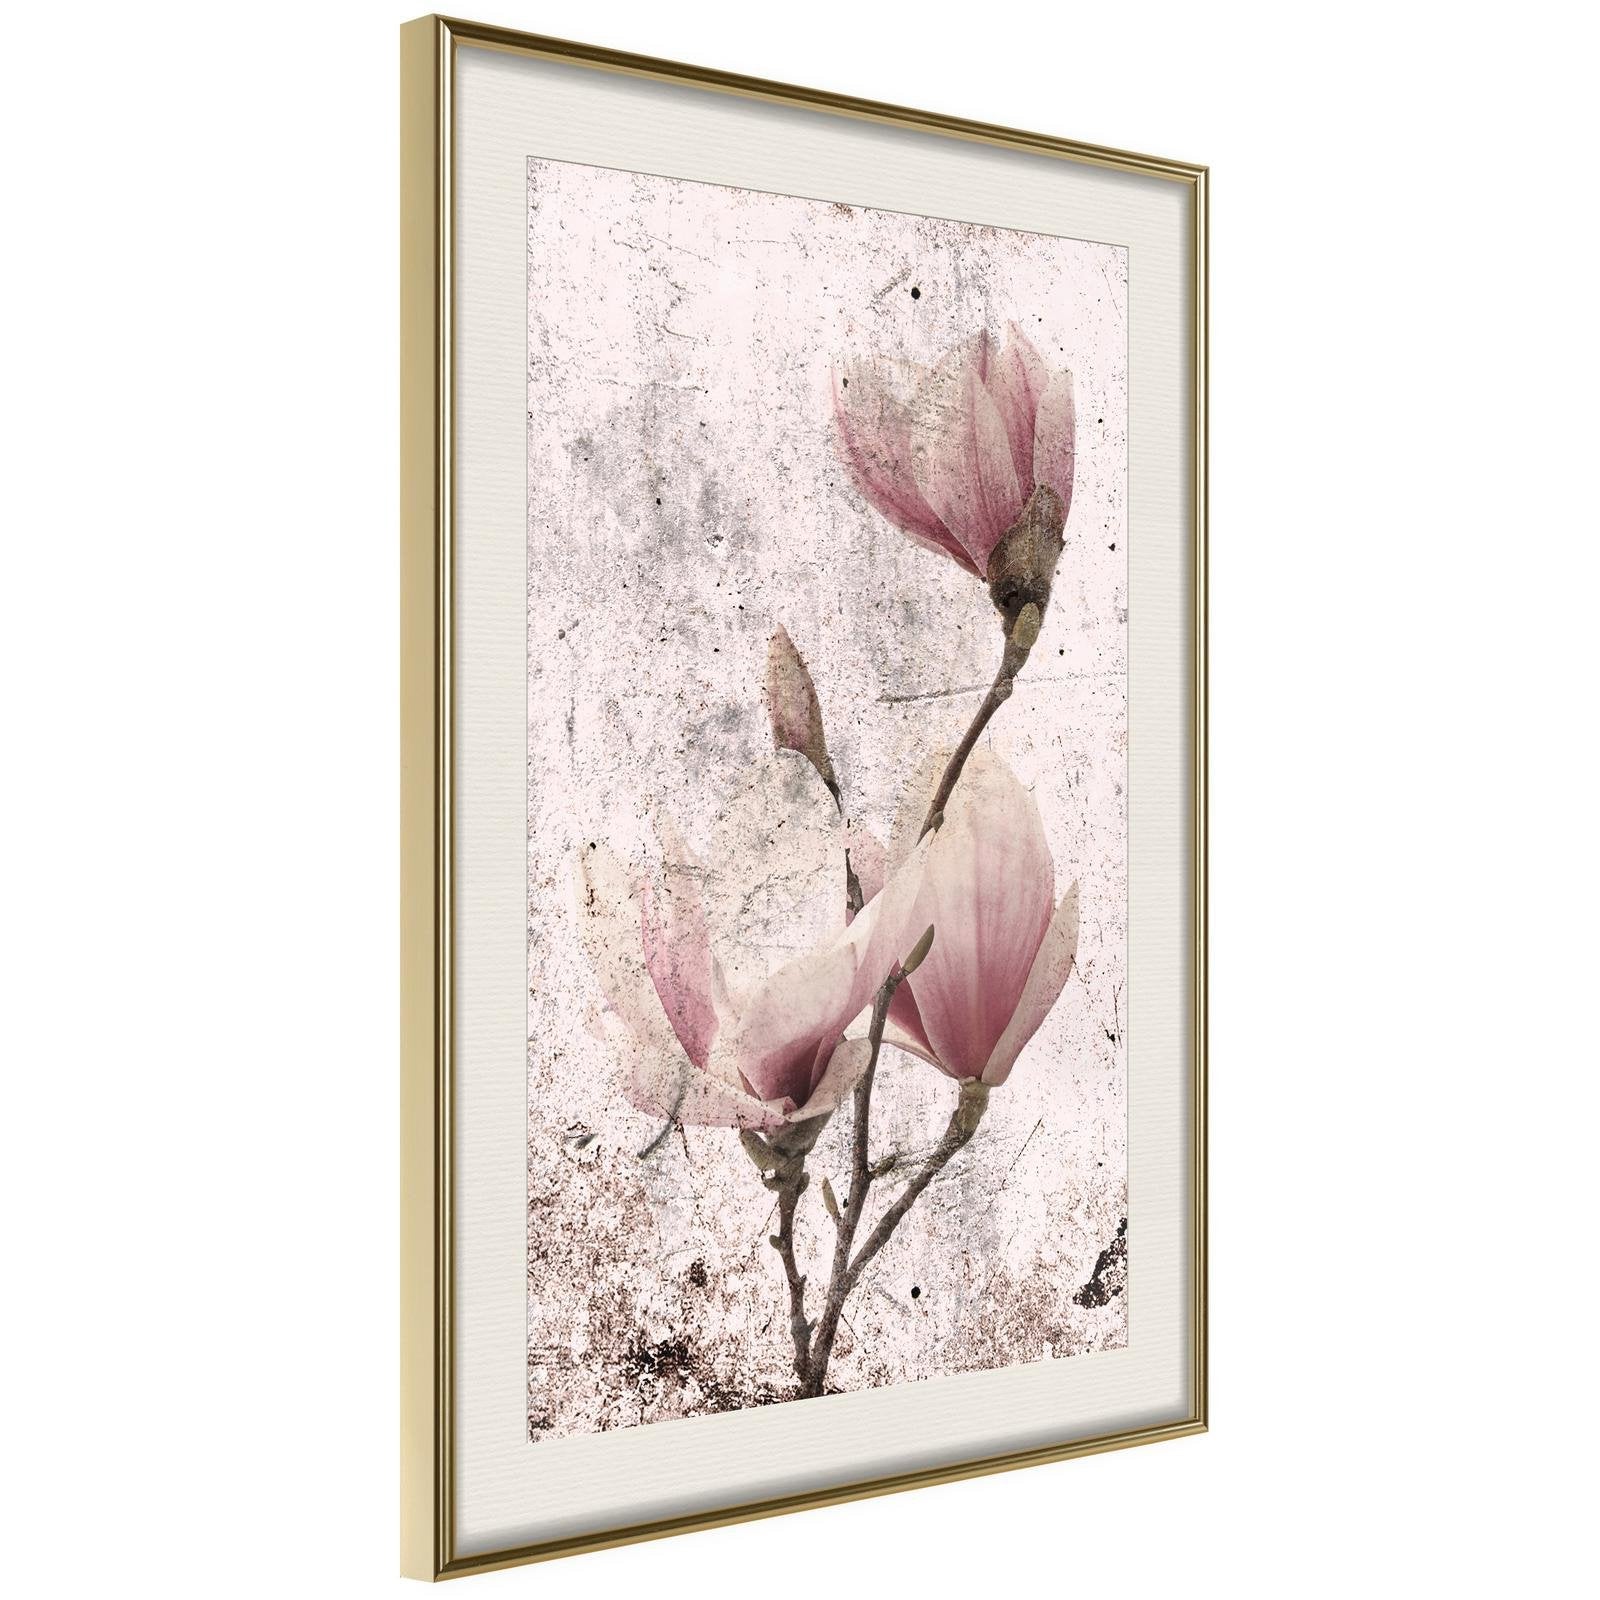 Inramad Poster / Tavla - Queen of Spring Flowers II-Poster Inramad-Artgeist-20x30-Guldram med passepartout-peaceofhome.se